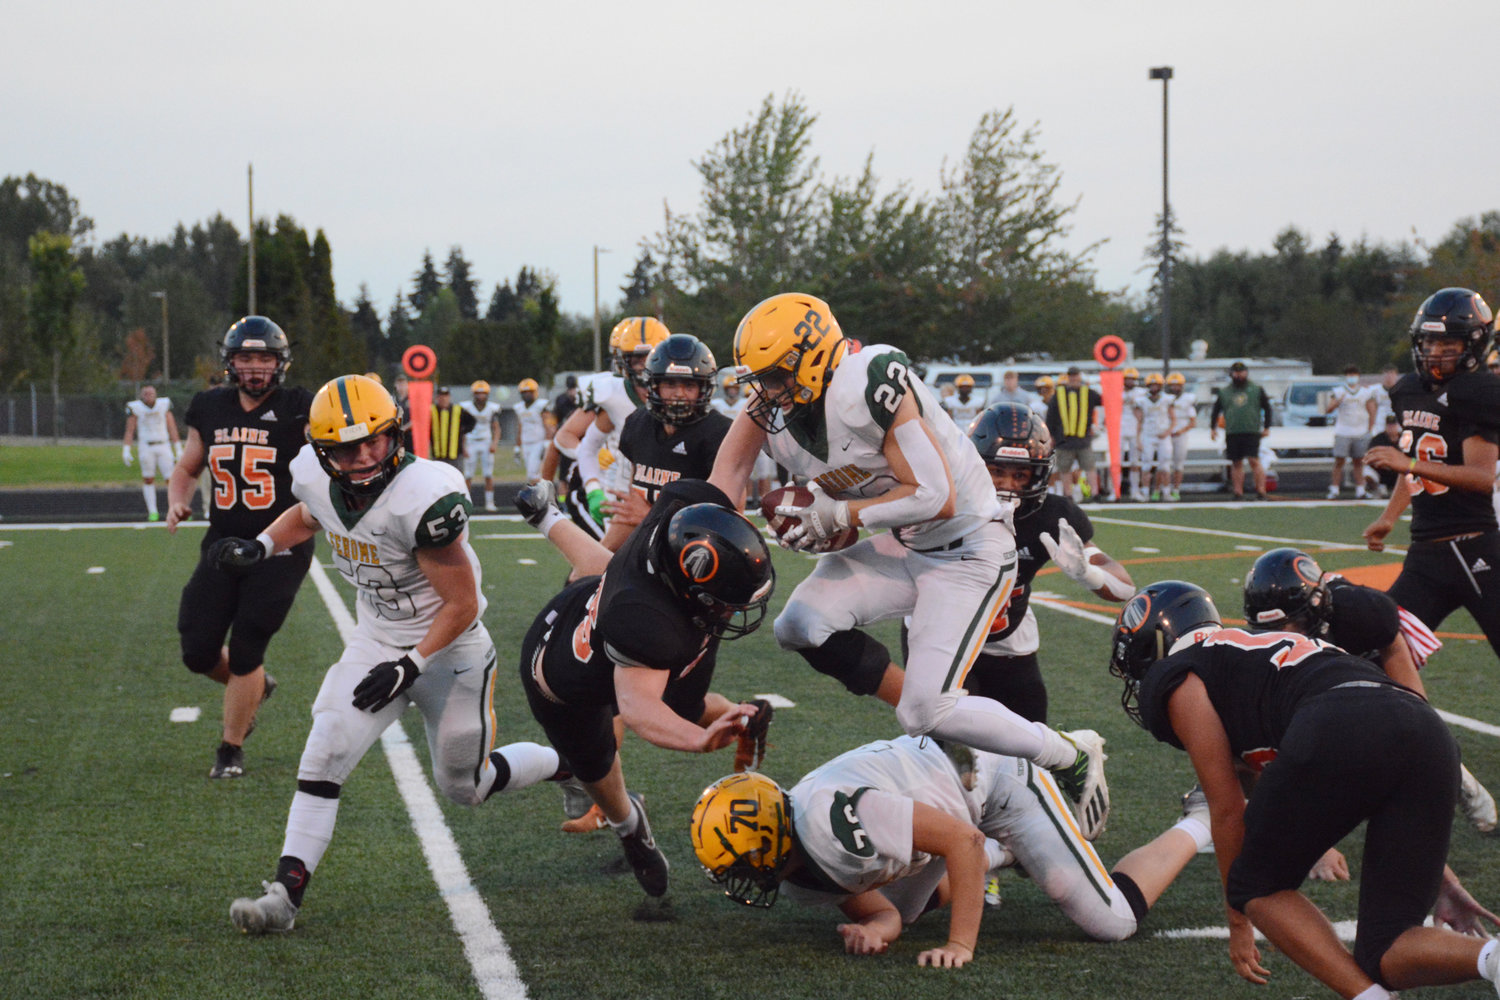 The Borderites throw themselves at the rushing Mariner offense at the Blaine High School stadium on September 9.